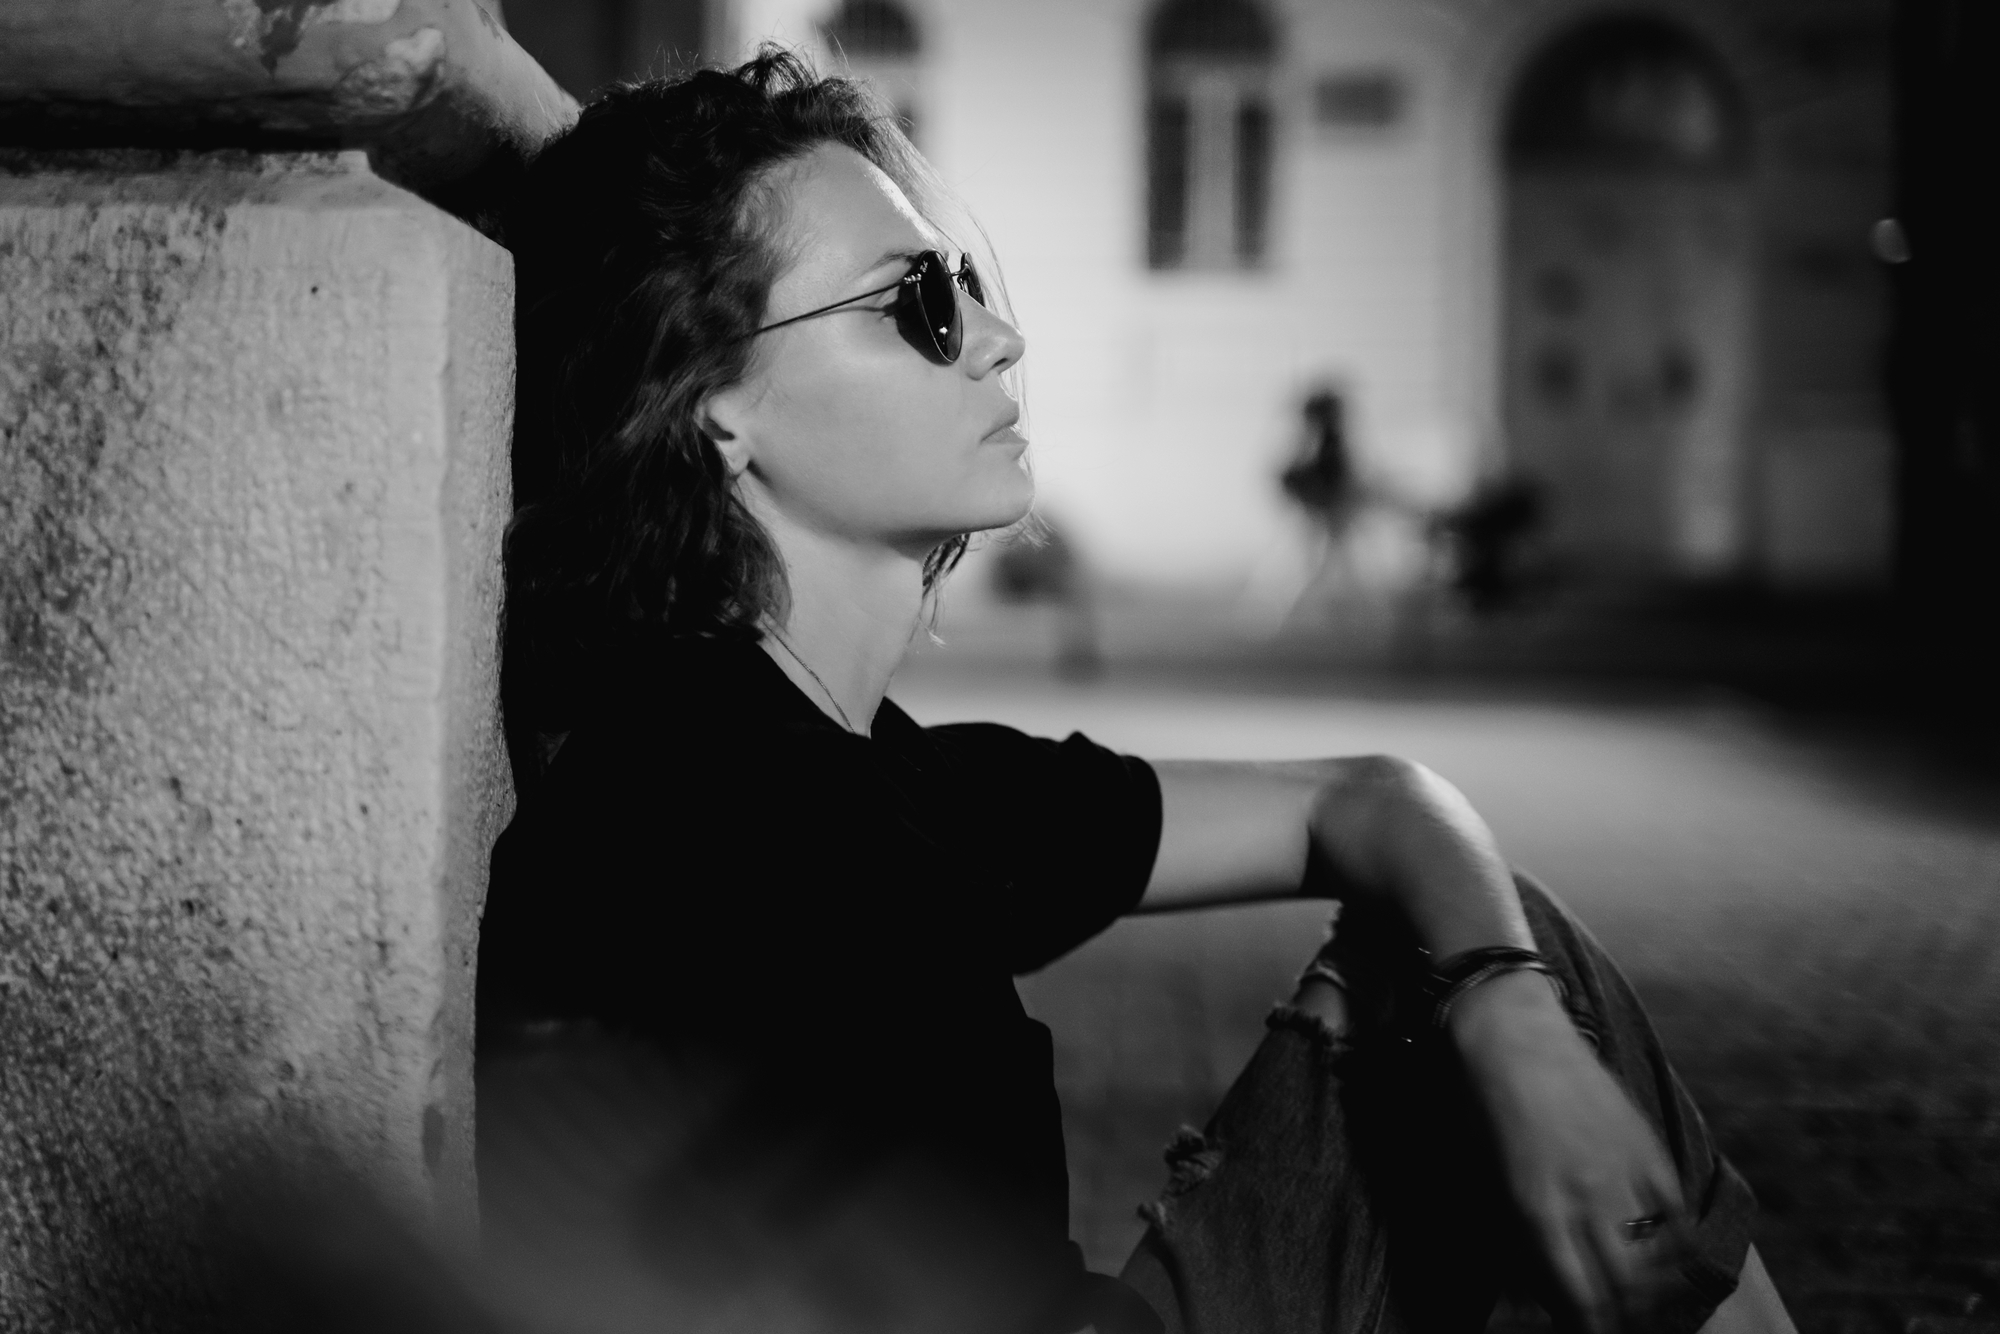 Black and white photo of a person with short hair sitting against a wall, looking thoughtful. They are wearing sunglasses, a dark shirt, and jeans. The background is blurred, suggesting a quiet urban setting at night.